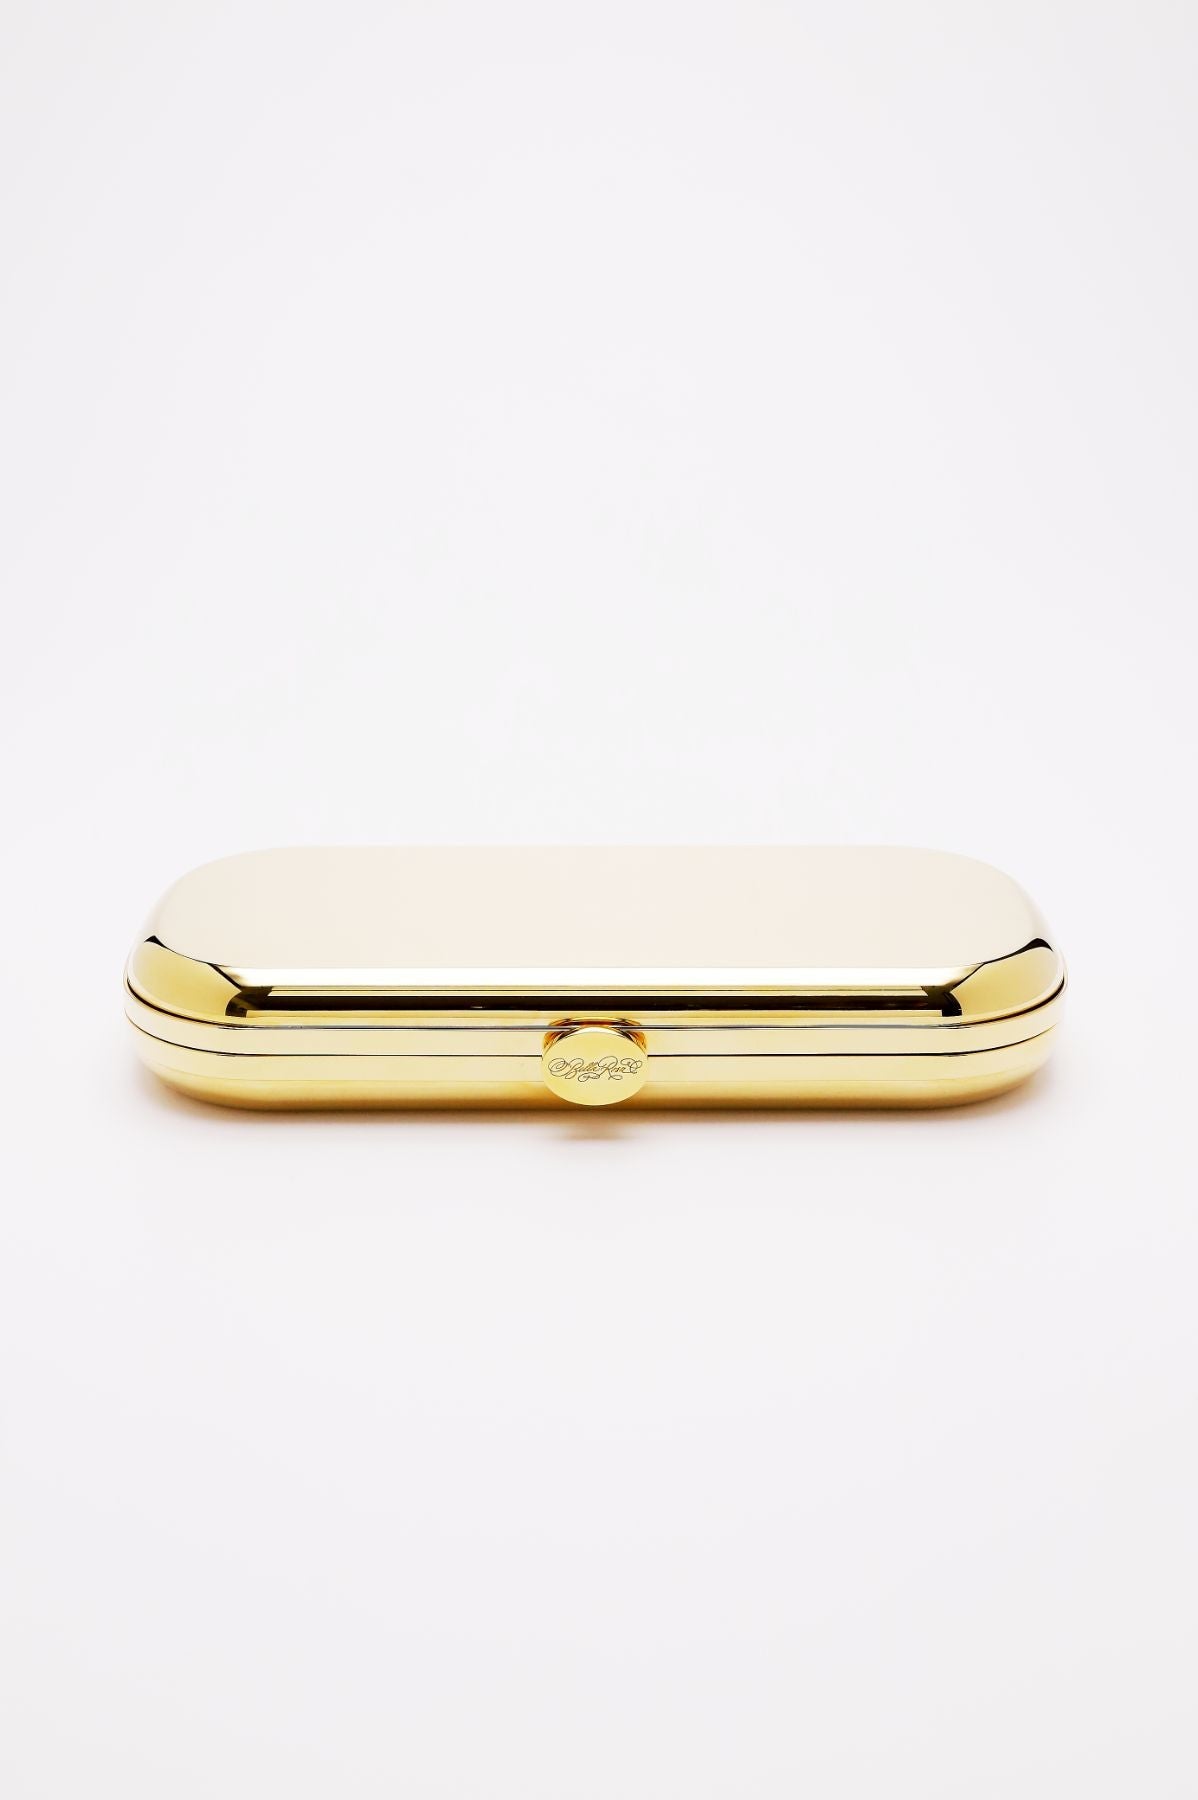 Gold-toned "The Bella Rosa Collection's Bella Clutch Golden Grande" against a white background.